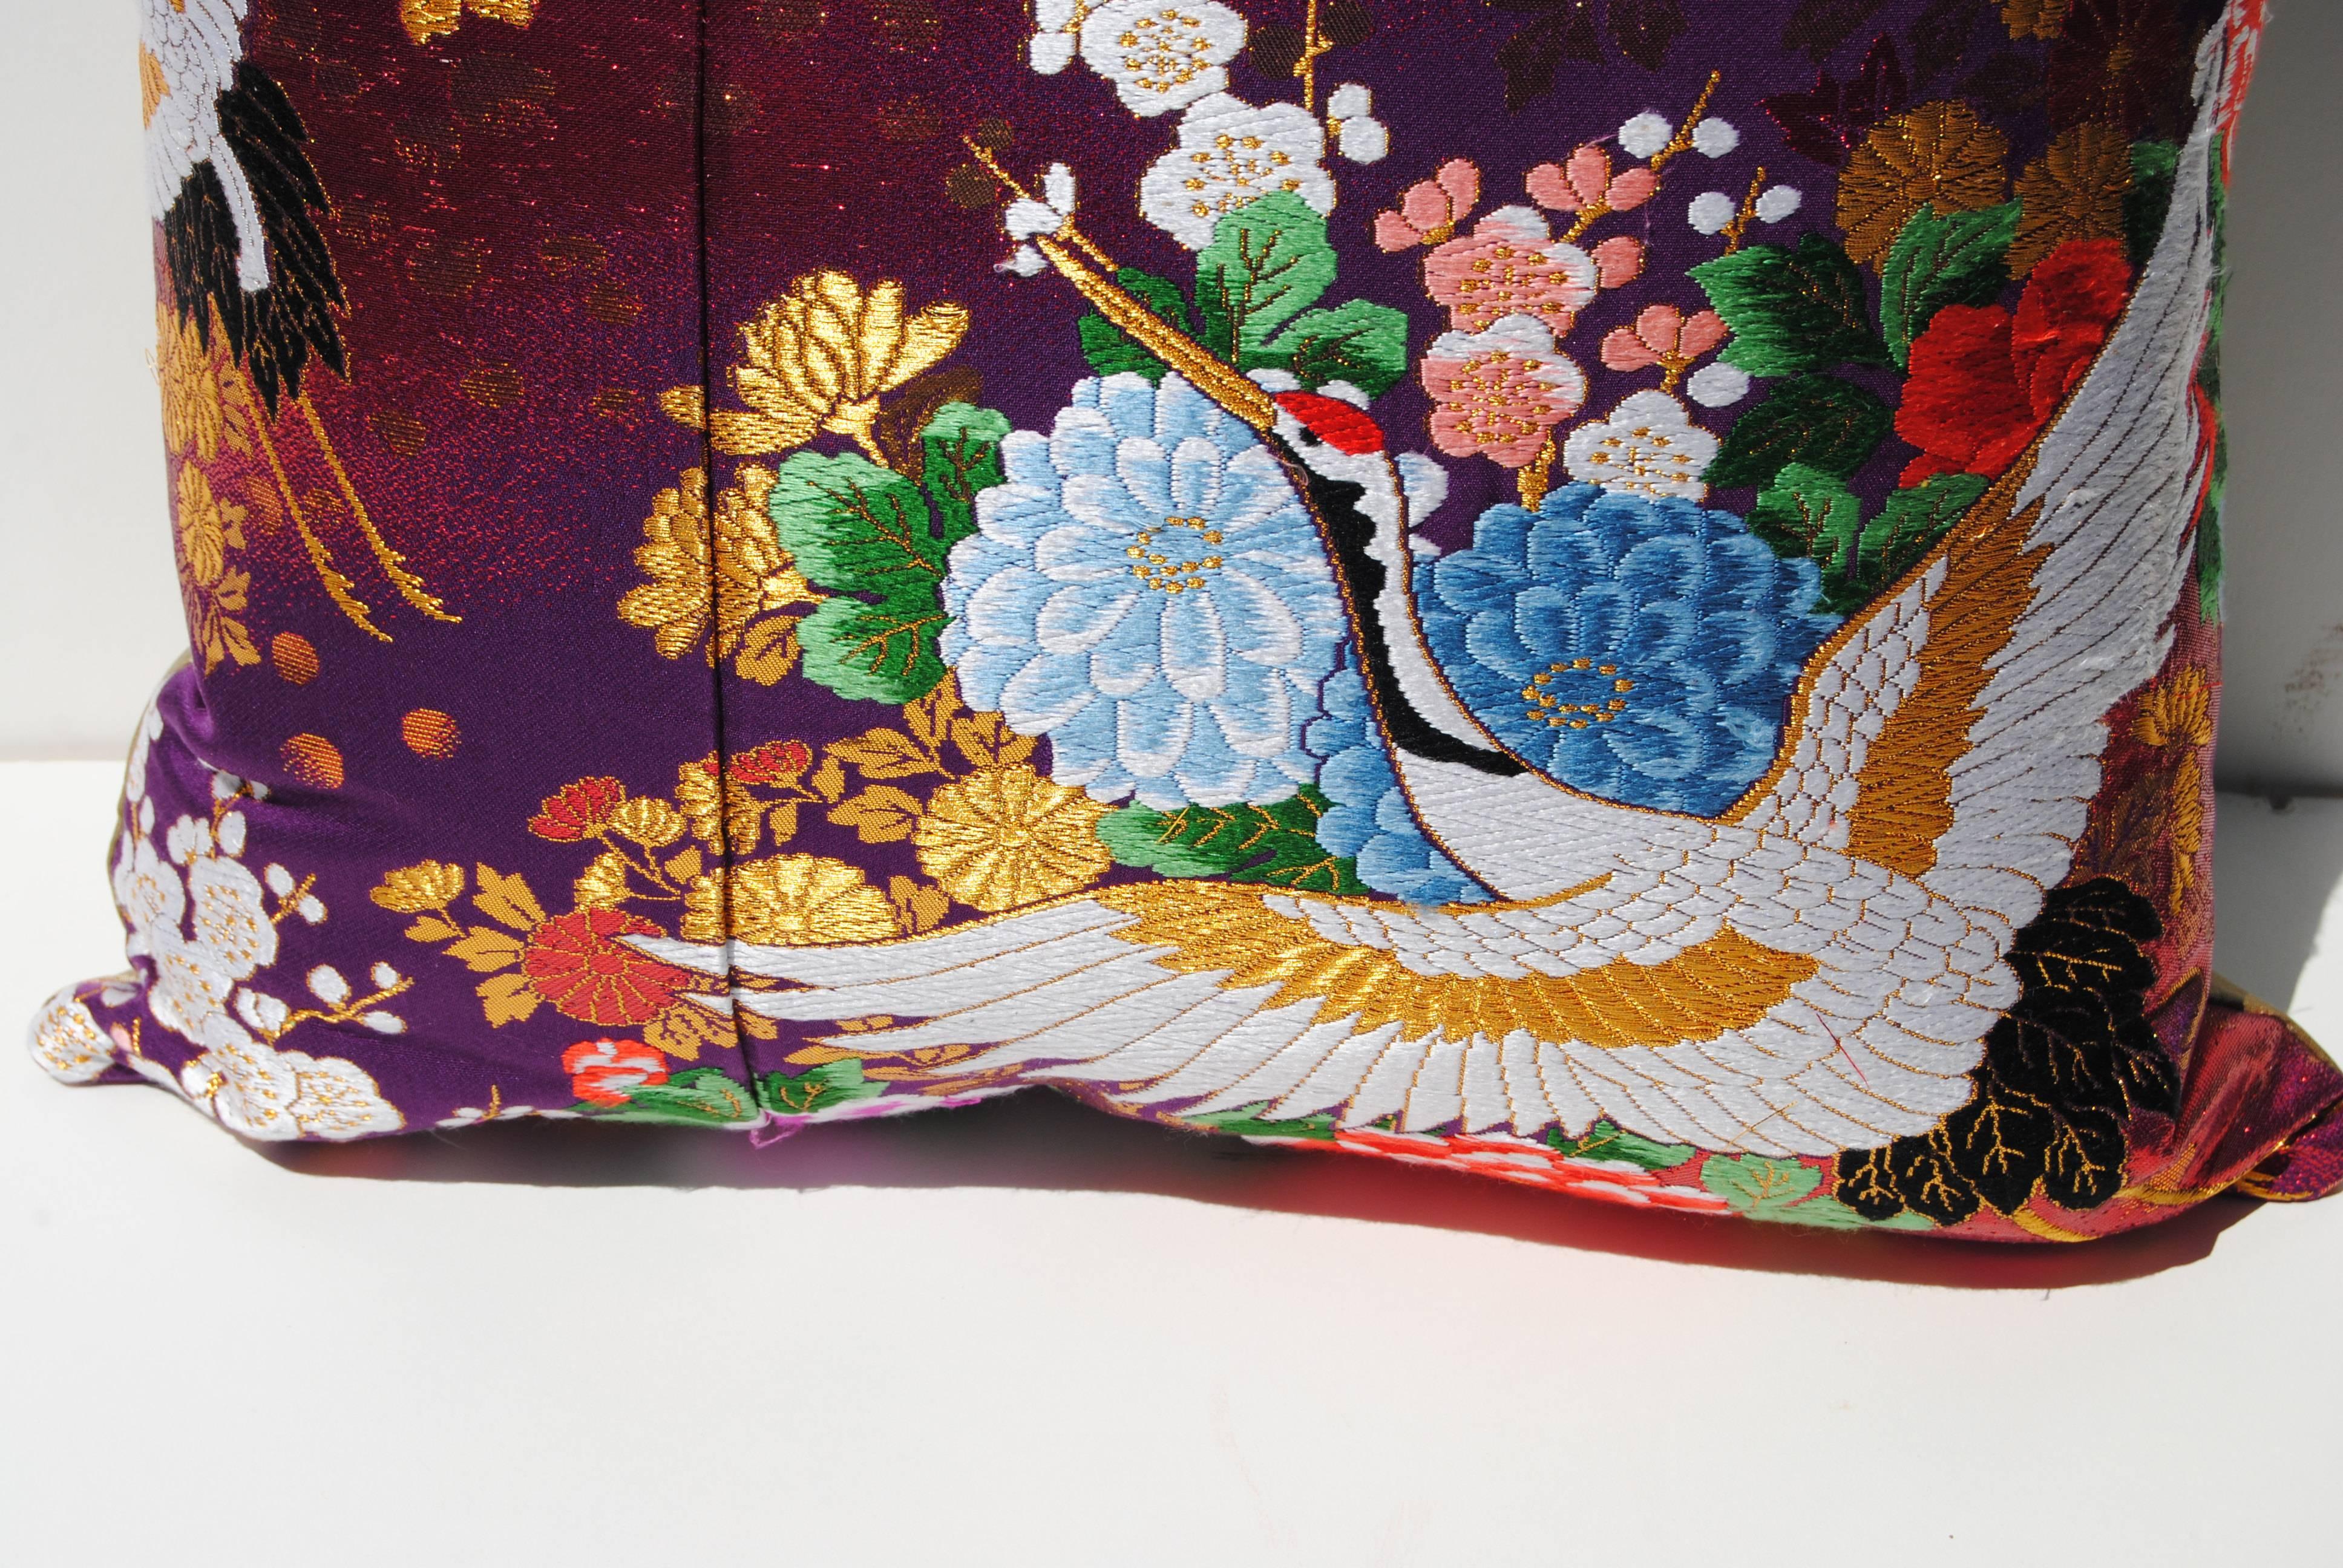 Custom pillow cut from a vintage silk Japanese uchikake, the traditional wedding kimono. Pillow has vibrant color with traditional Japanese designs. It is backed in a putty color silk, filled with an insert of 50/50 down and feathers and hand-sewn